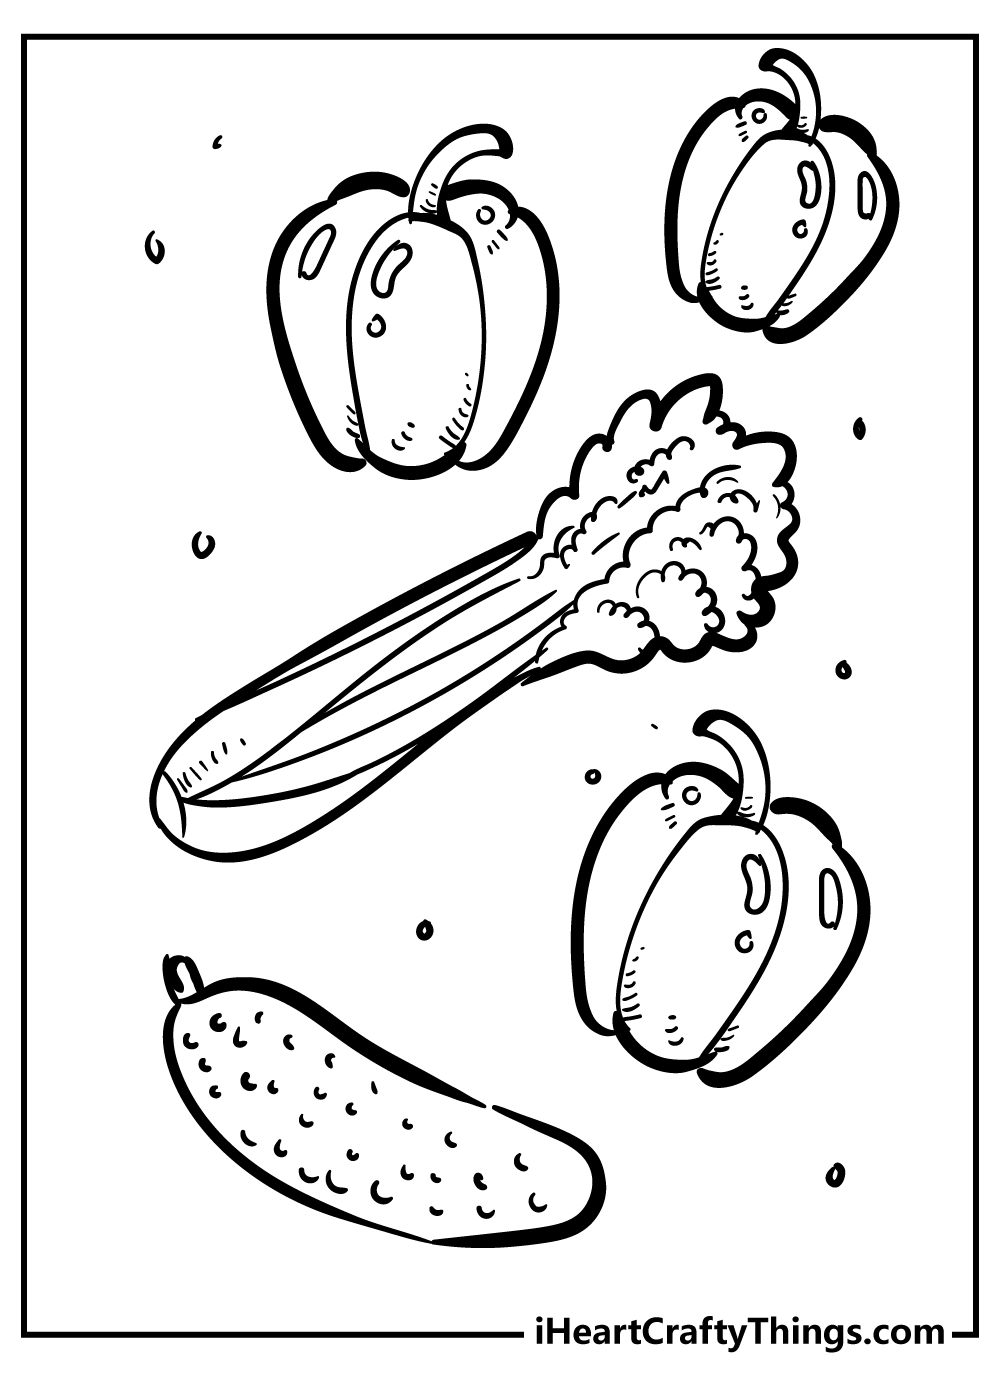 Printable Vegetables Coloring Pages Updated 20